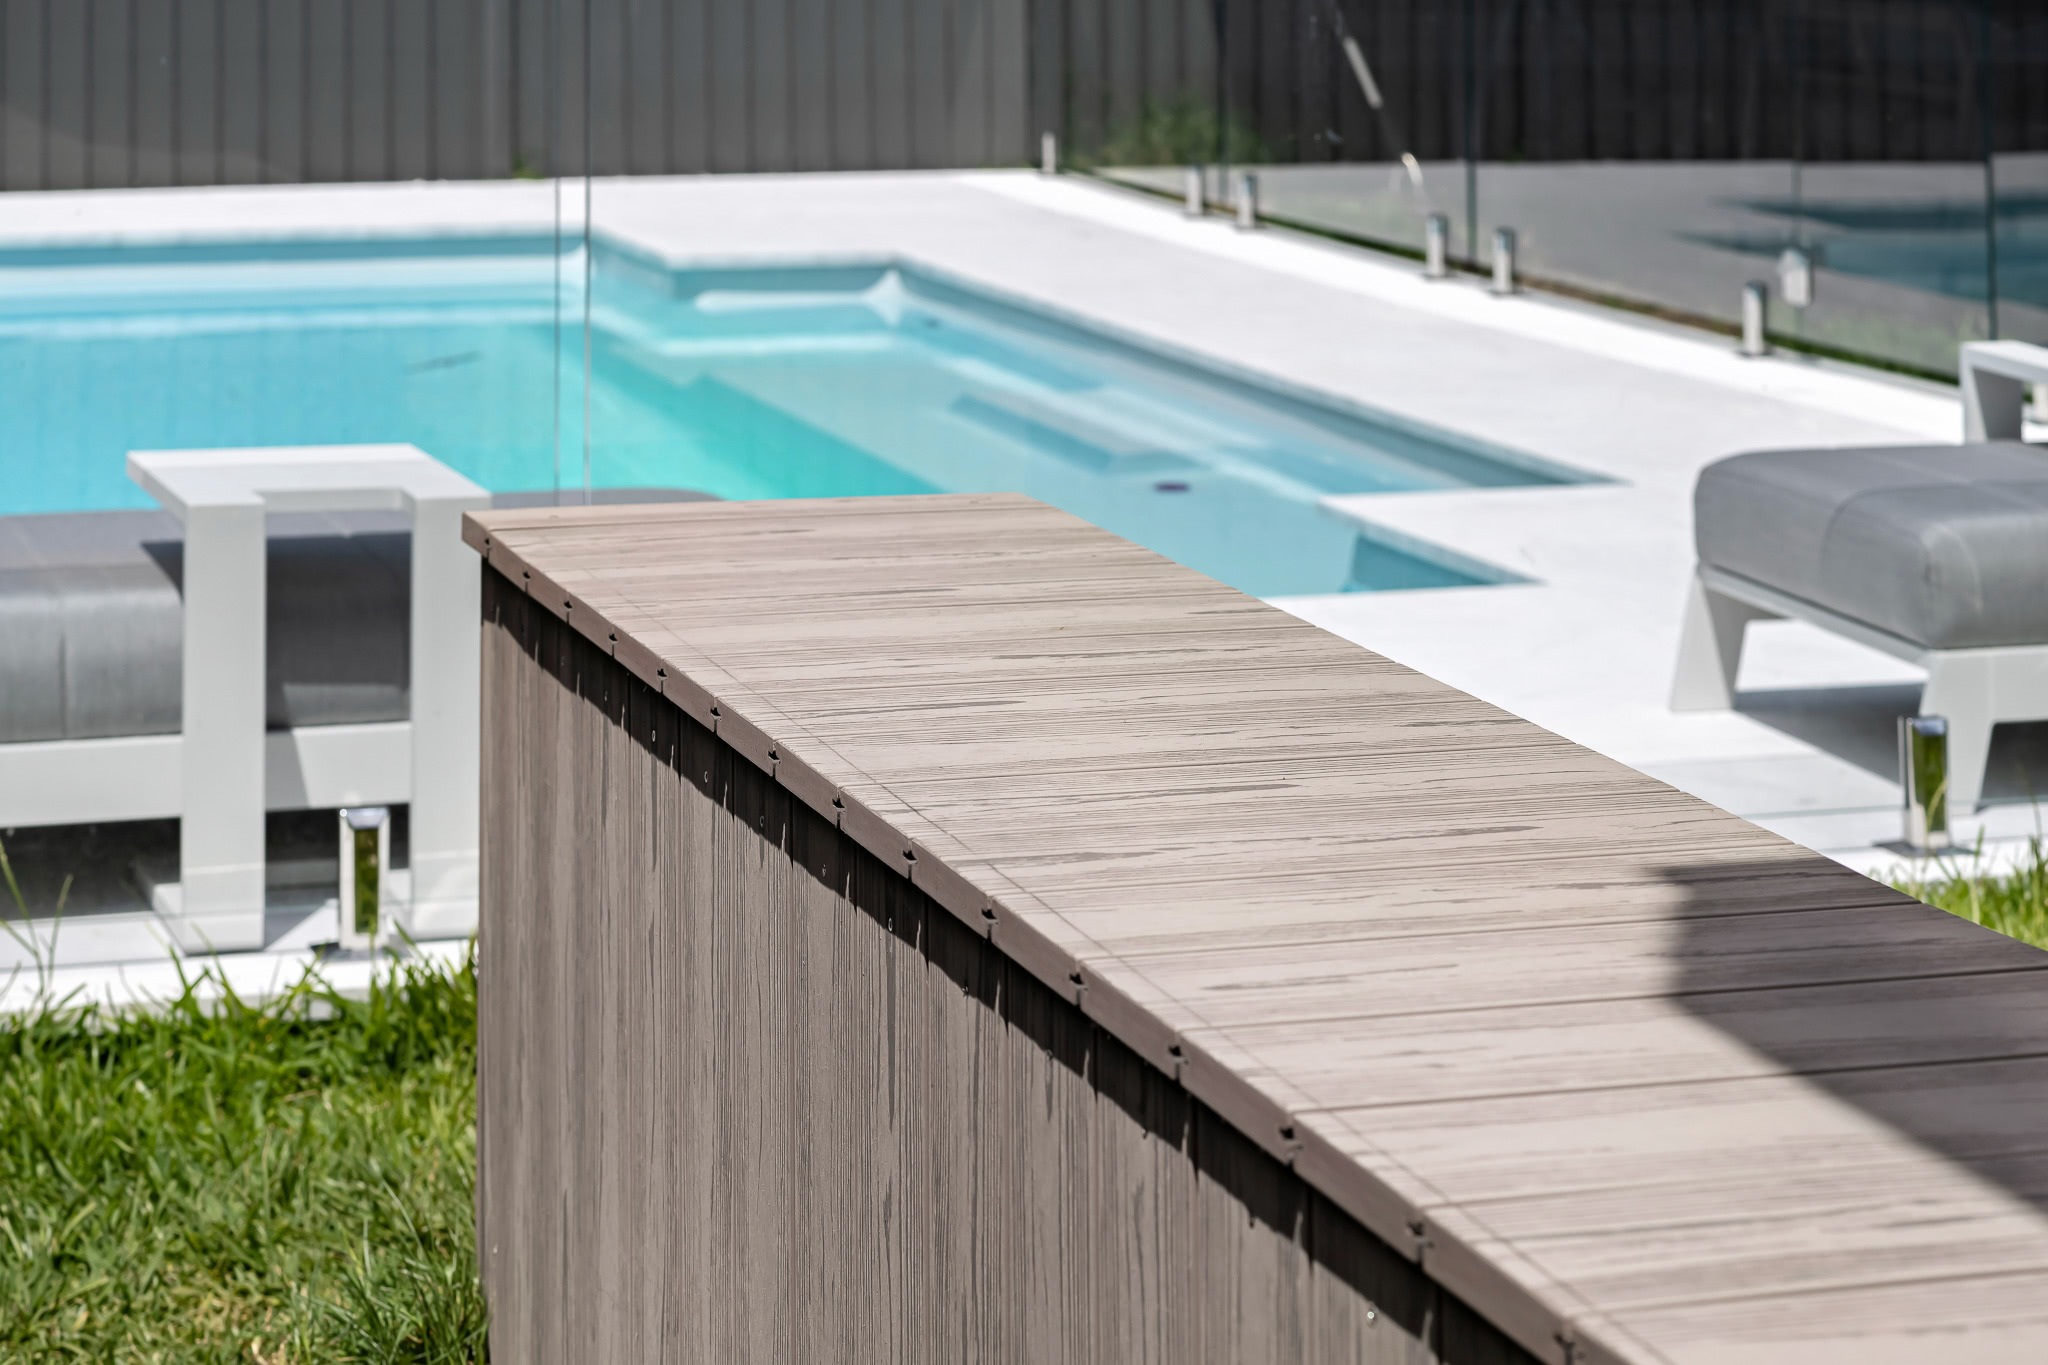 A ledge made from gray-silver composite deck boards overlooking a pool